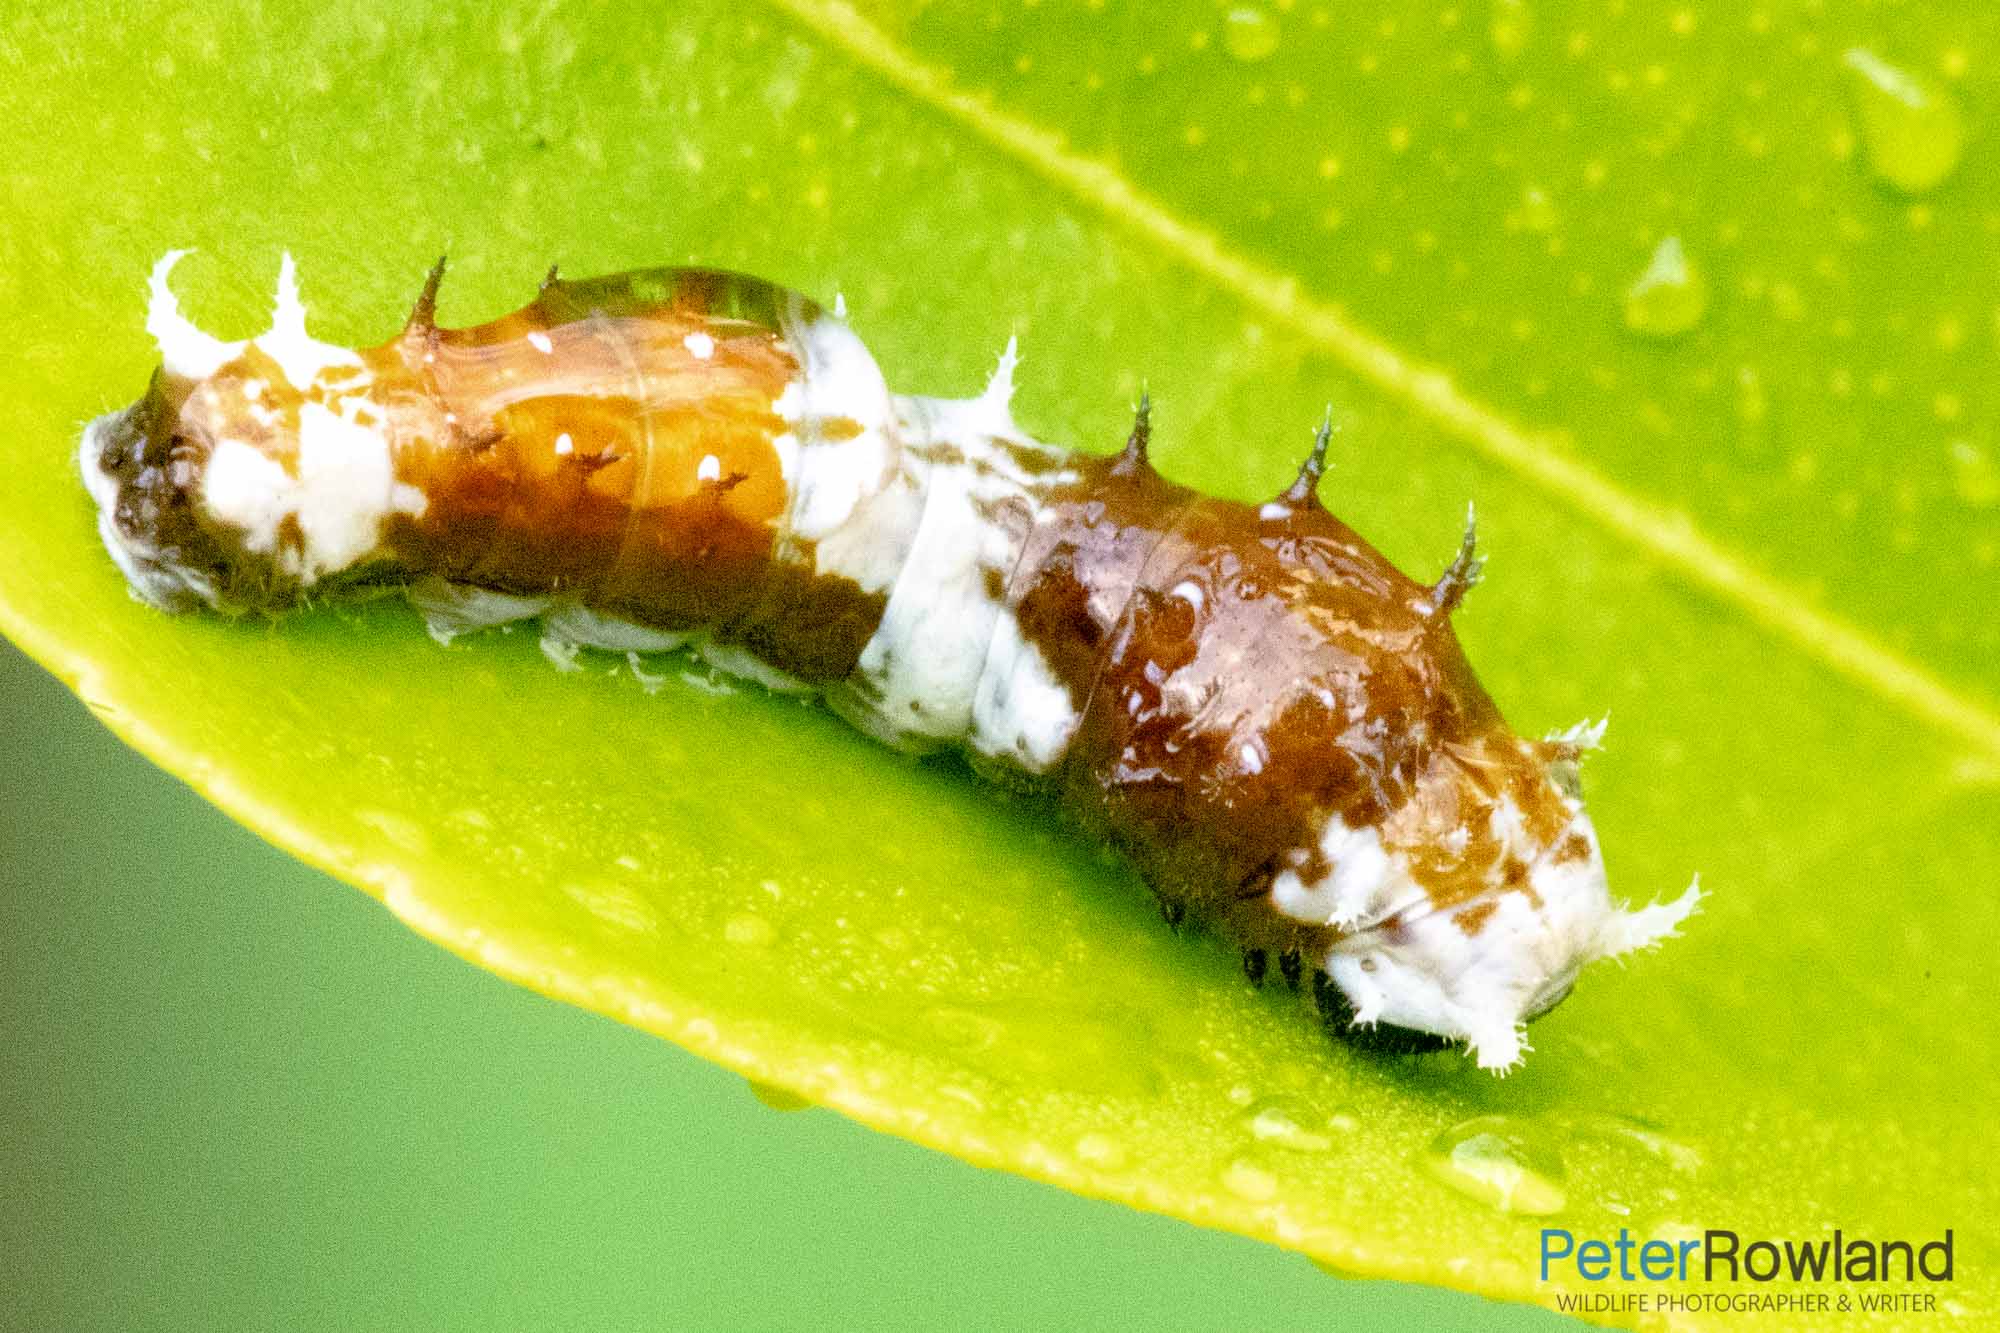 An early instar caterpillar of an Orchard Swallowtail feeding on a green leaf